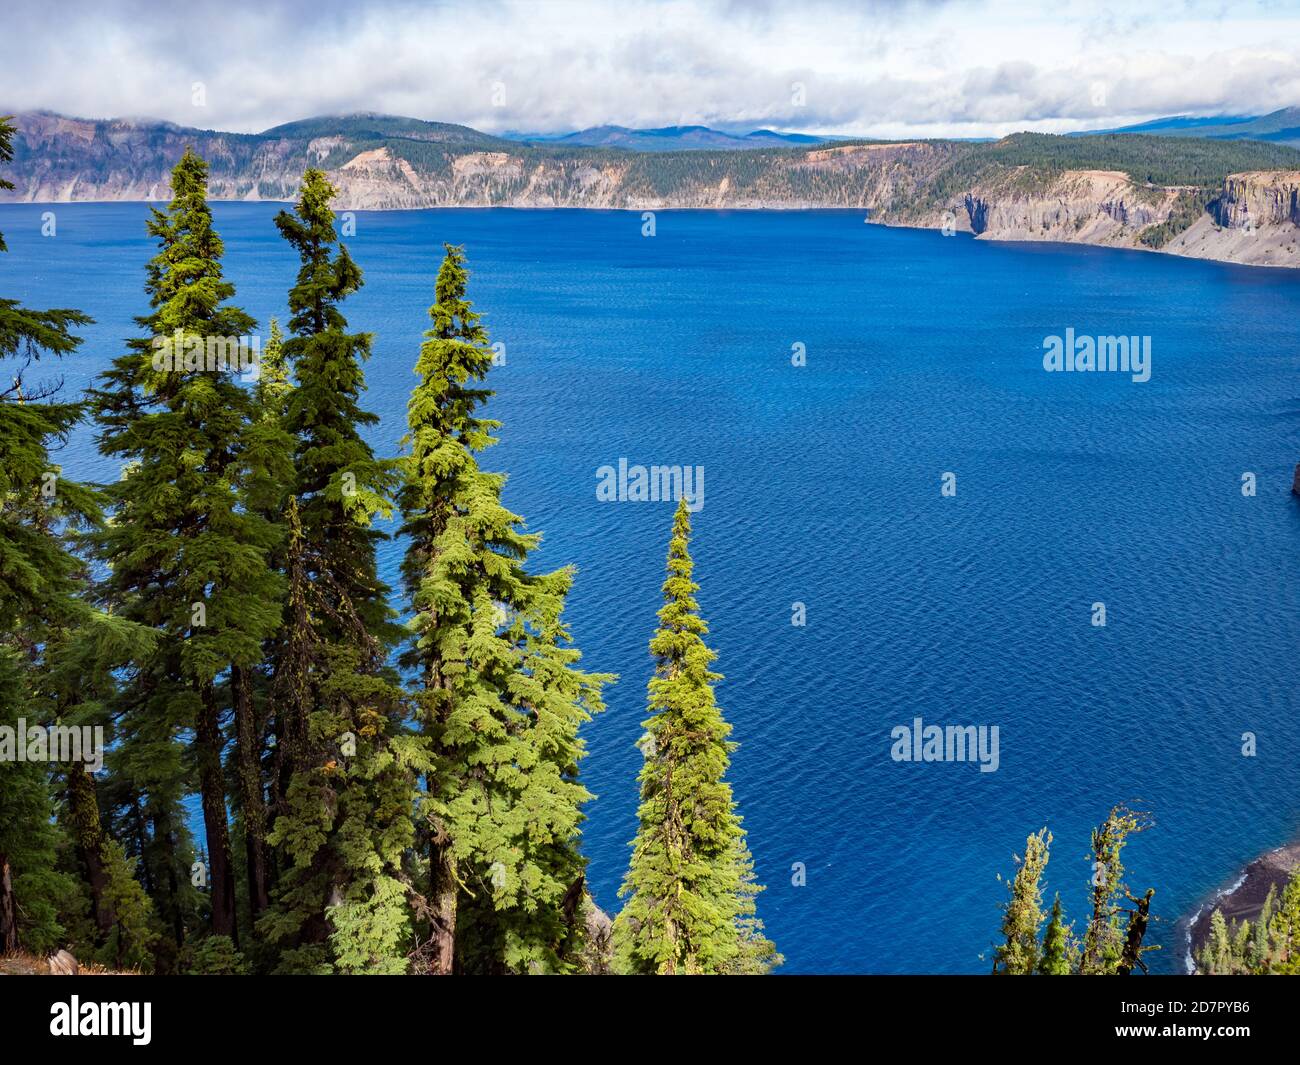 The stunning scenery at Crater Lake National Park, Oregon, USA Stock Photo